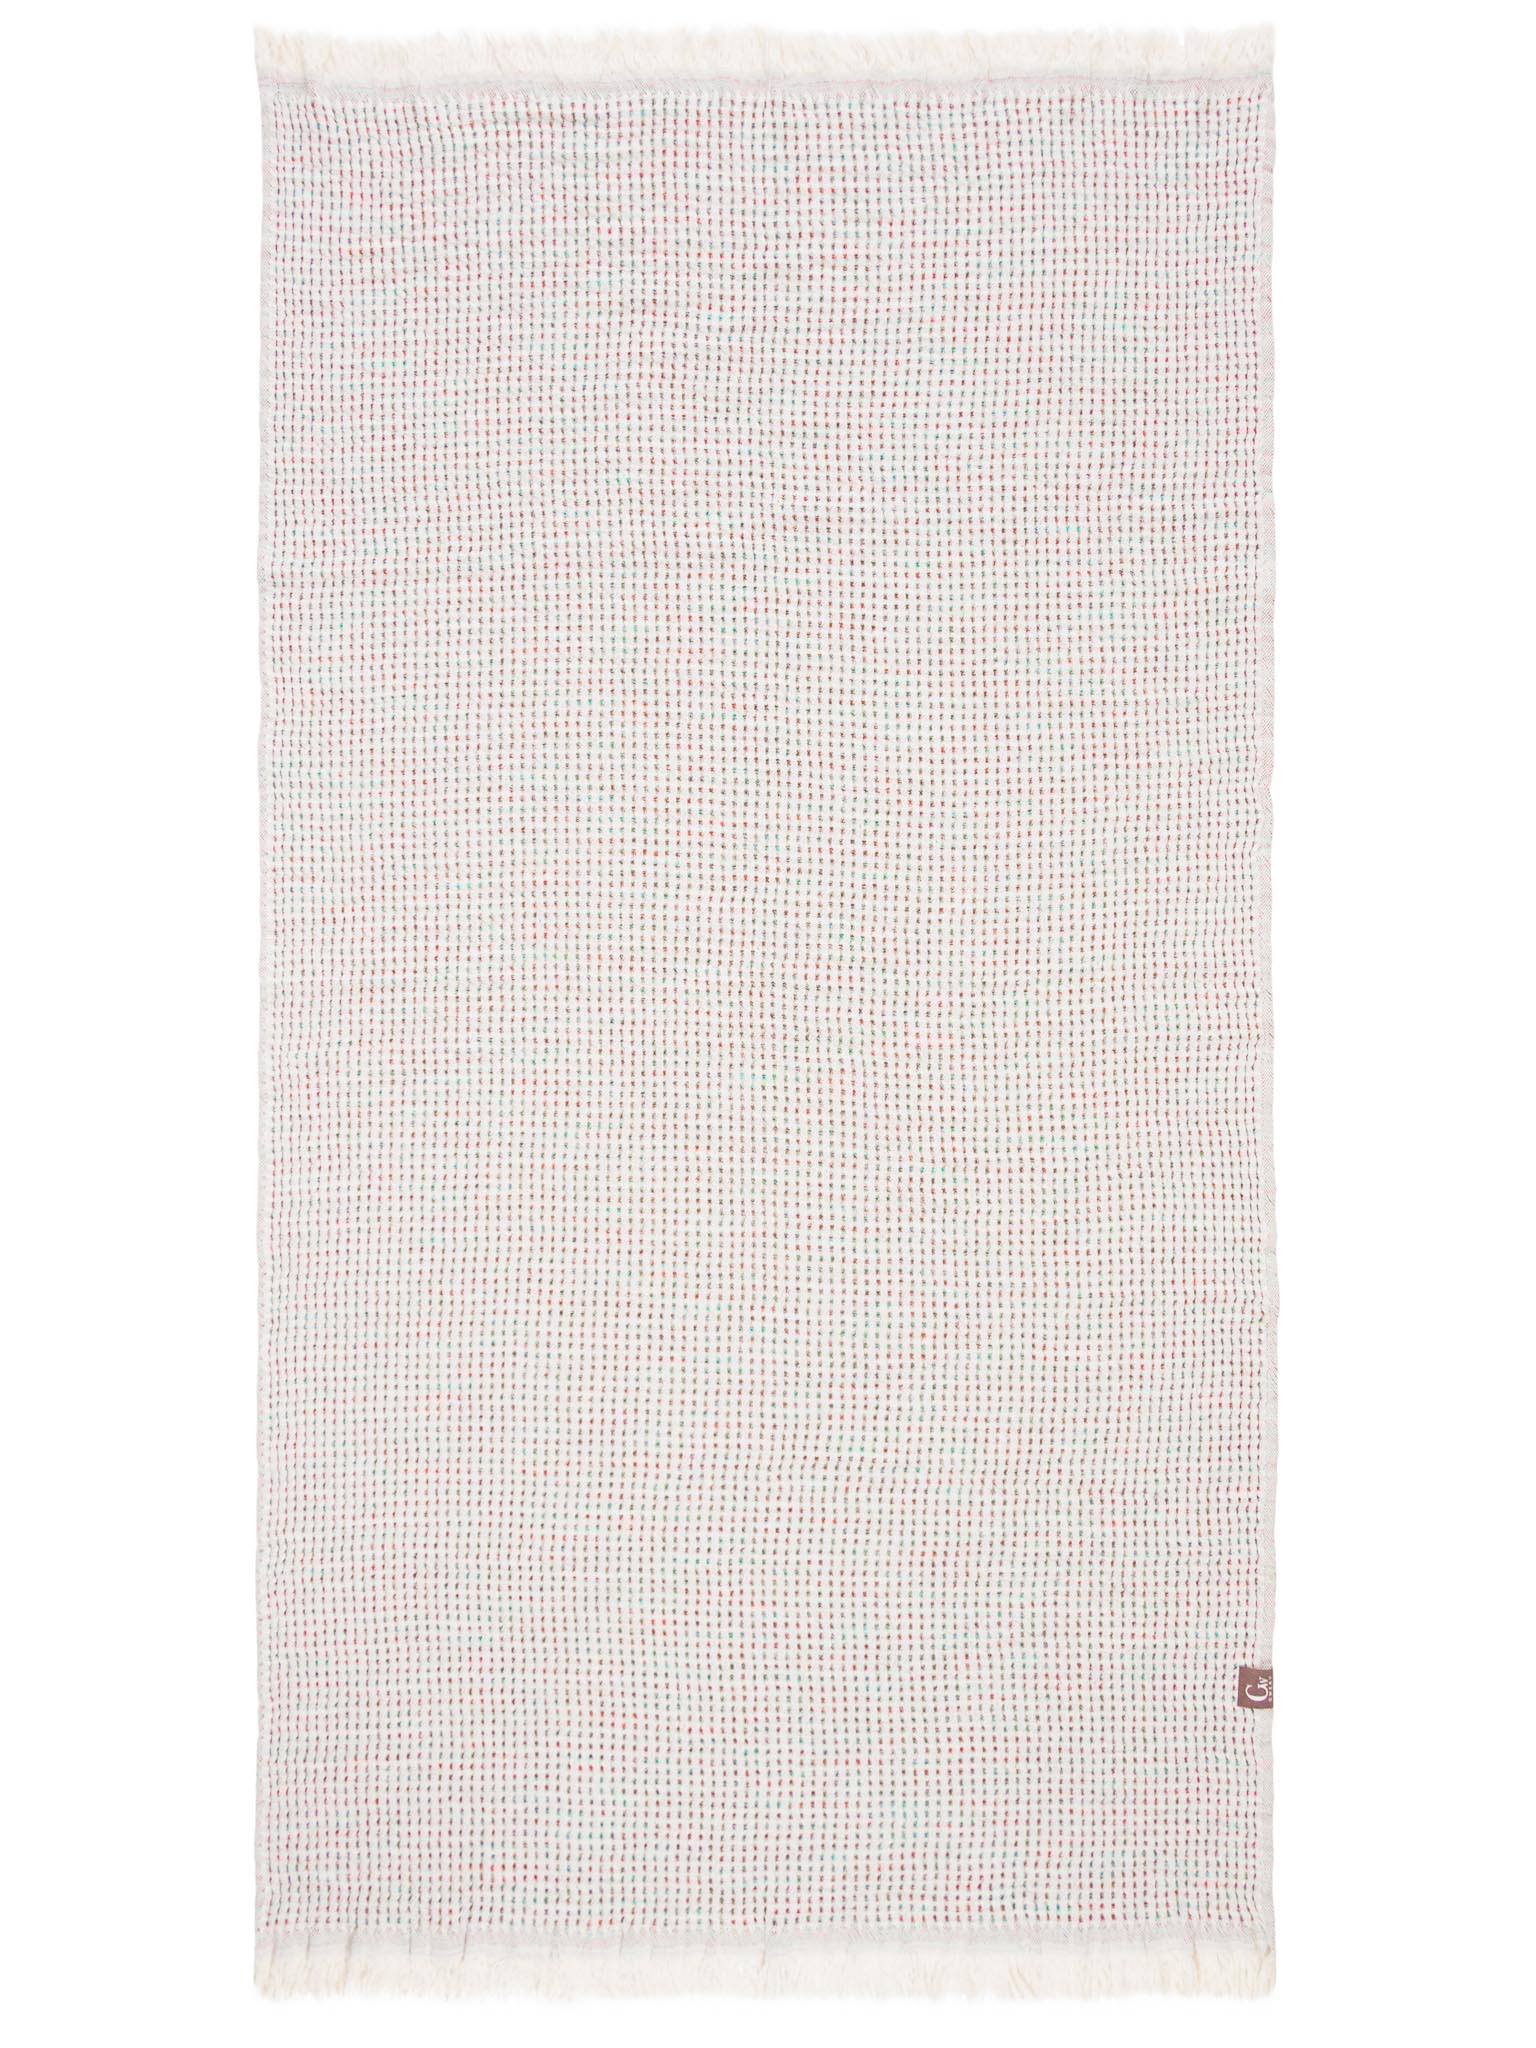 Multicolored double sided, honeycomb beach towel open up